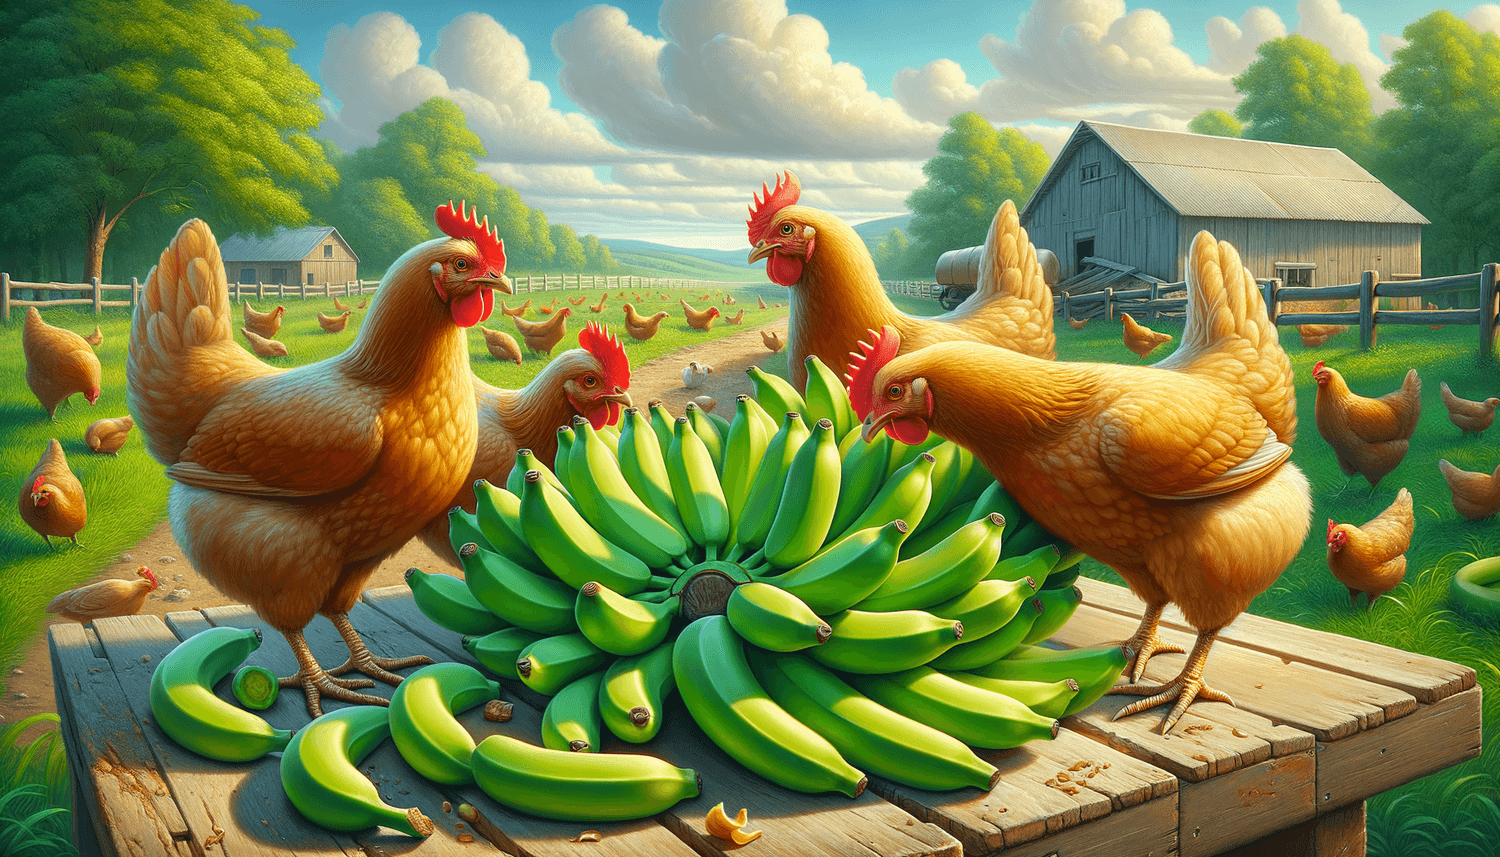 Can Chickens Eat Green Bananas?